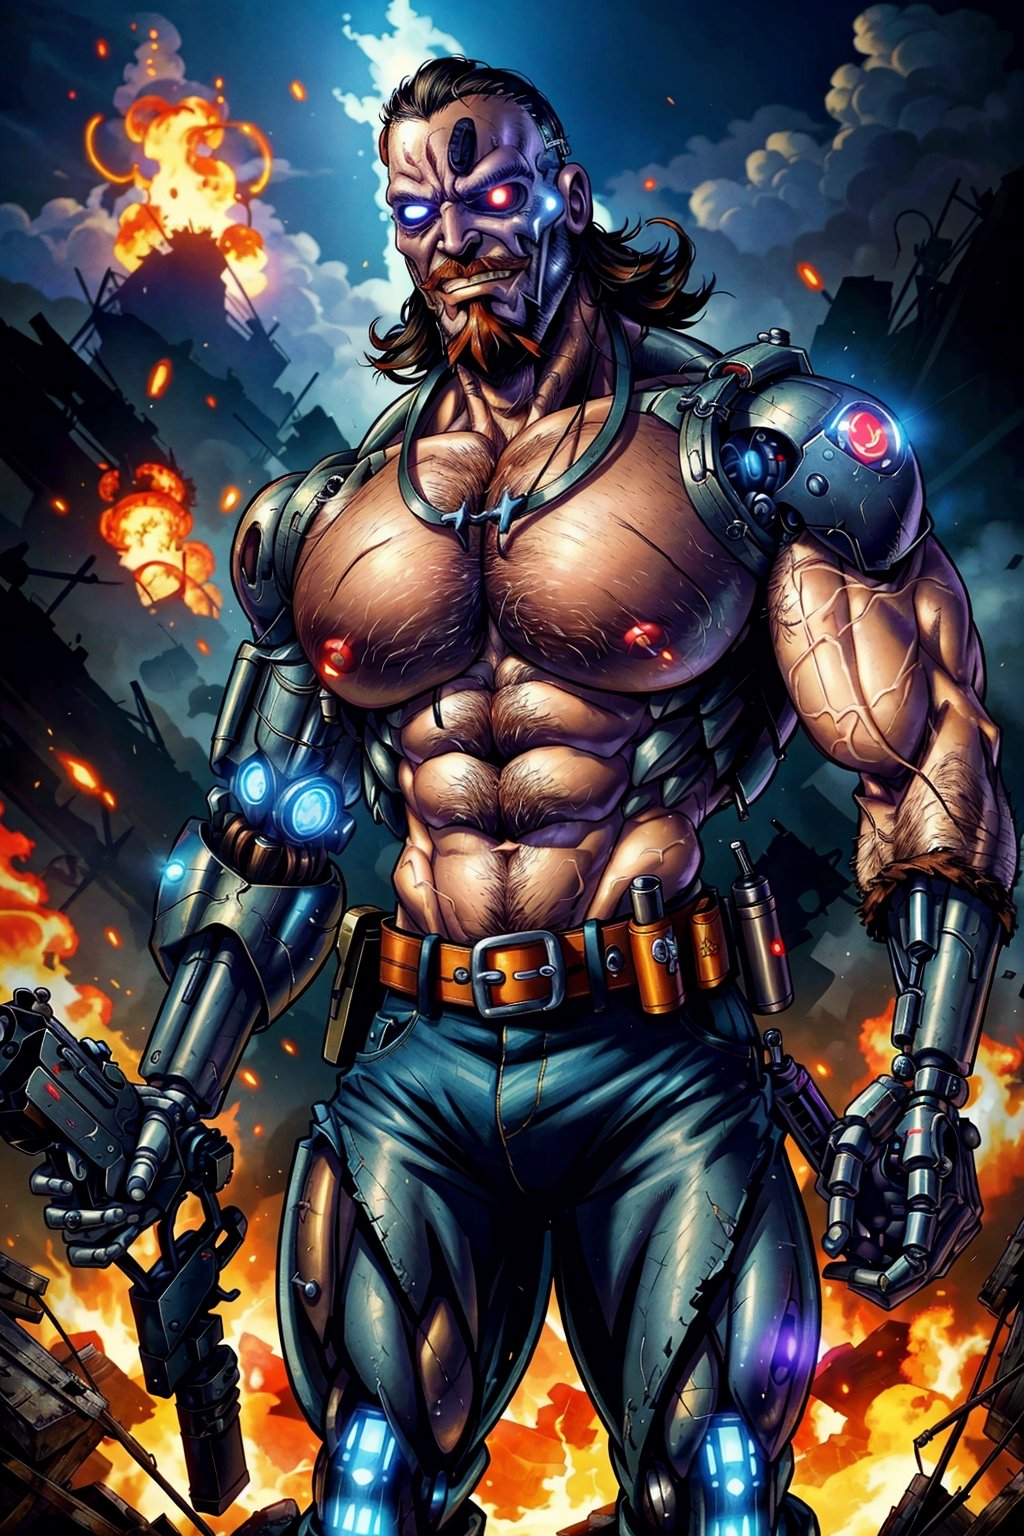 ((young Max Payne transformed by a machine into a cyborg)), muscular, massive pecs, massive arms, shirtless, worn out tactical pants with belt and gun, patrols and scans the street, ((grimace of pain)), ((massive body hair)), ((long beard)), ((short hair)), tropical island, destroyed city, big smoke, big flames, post-apocalypse, ((face details, eye details)), ((glowing eyes)), horror, looks at the viewer,(1man)